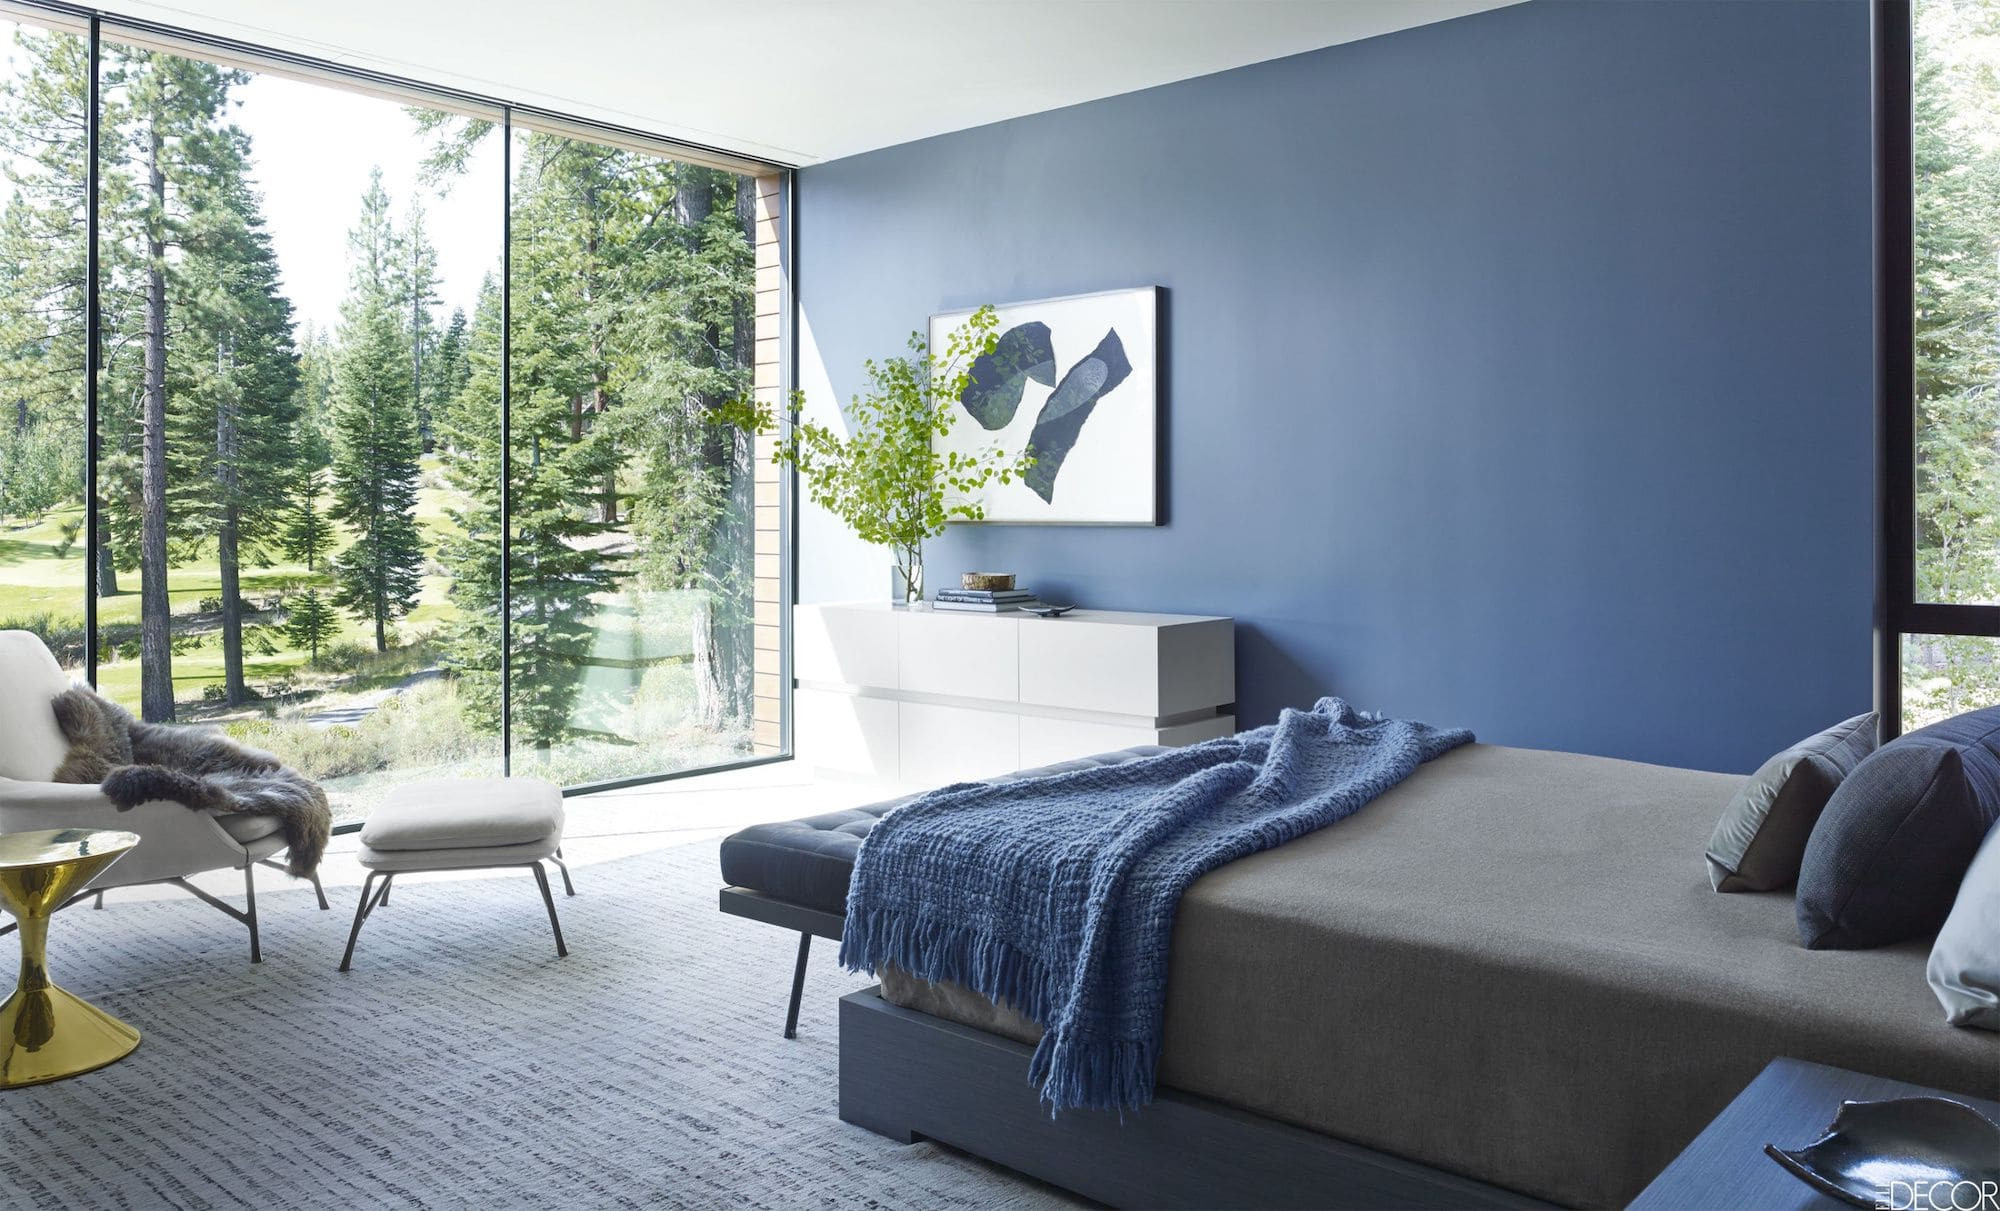 Best Paint For Bedroom
 Best Bedroom Colors For Sleep Read NOW Before Painting